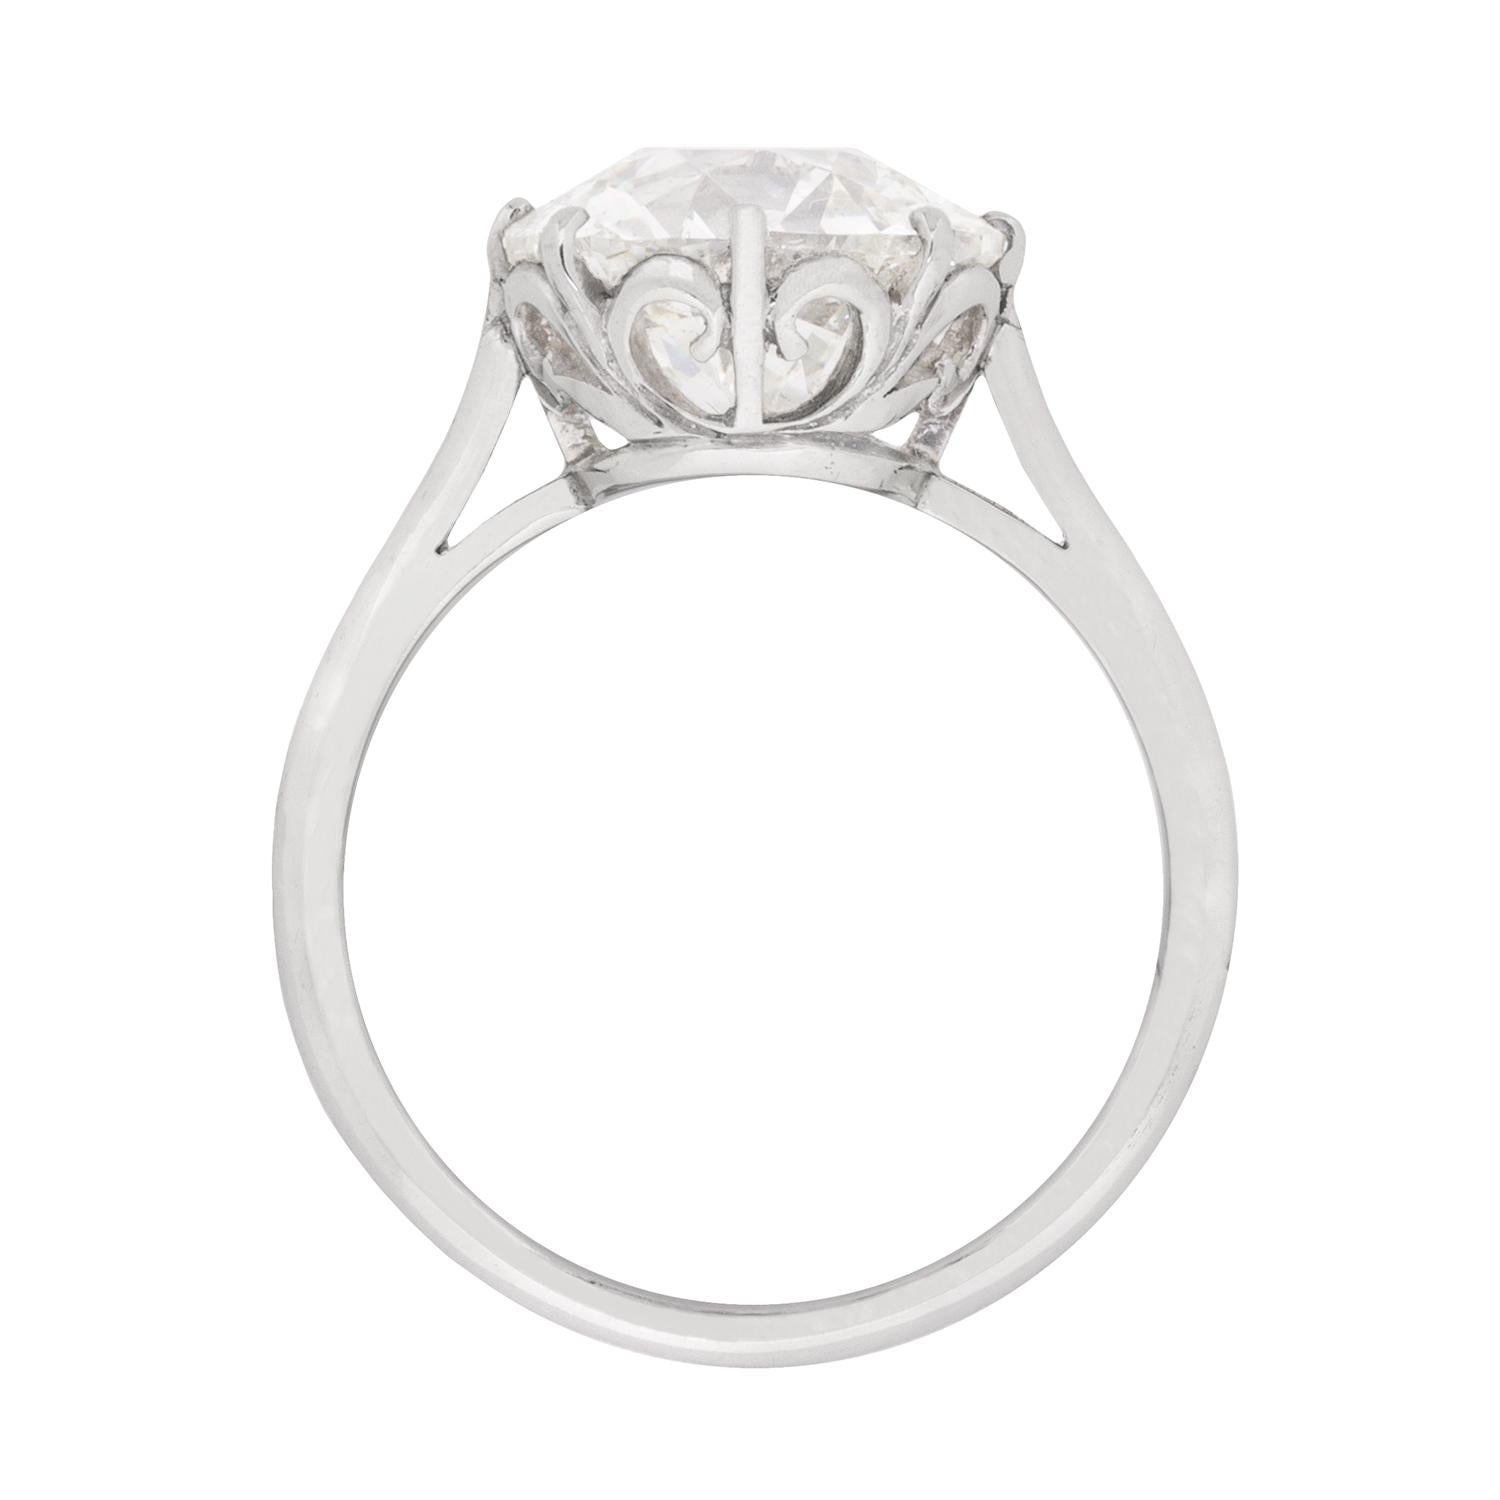 A breathtaking old European cut diamond, weighing 3.66 carats, is the solo performer in this stunning late Art Deco period engagement ring.

This spectacular stone, which has been certified by the World Gemological Institute to an I colour and an